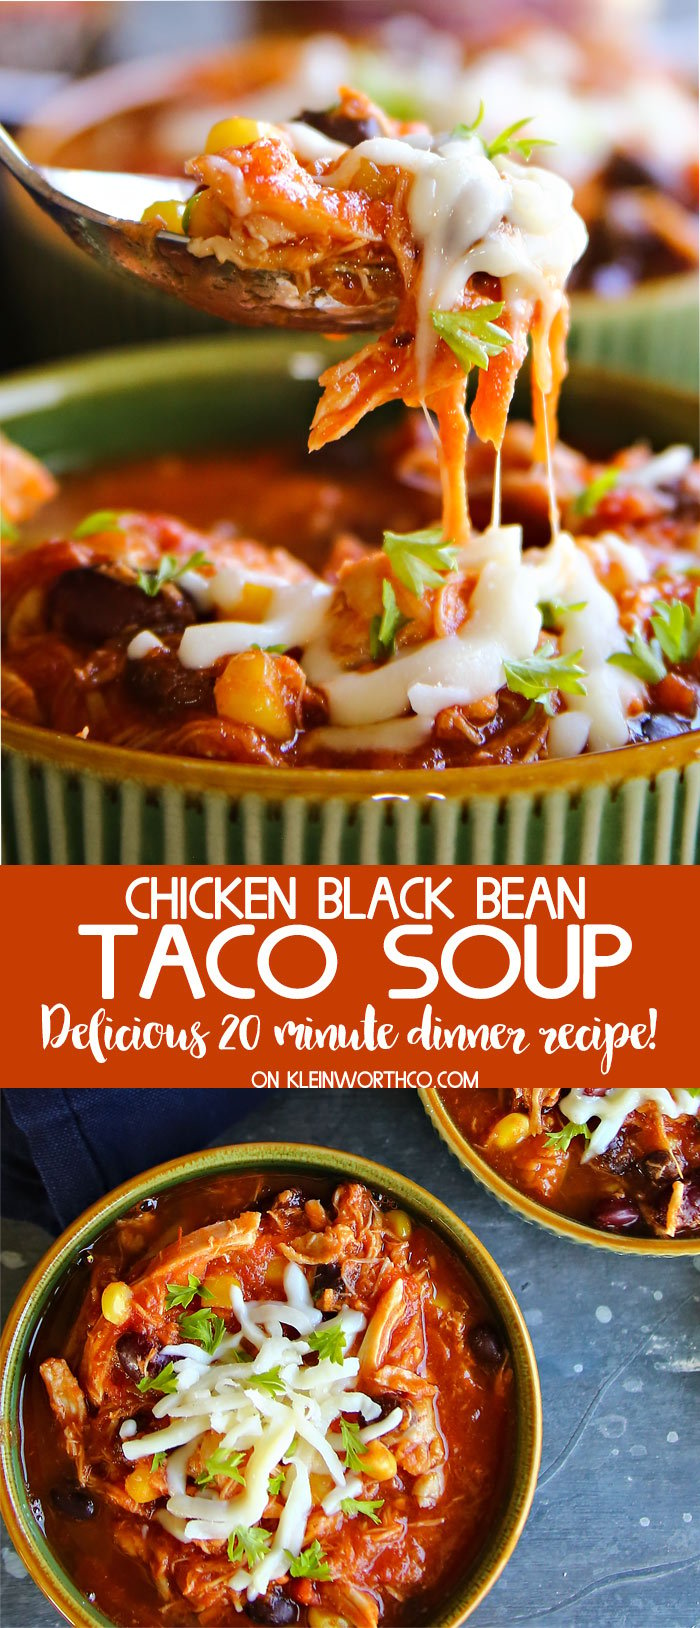 How to make Chicken Black Bean Taco Soup